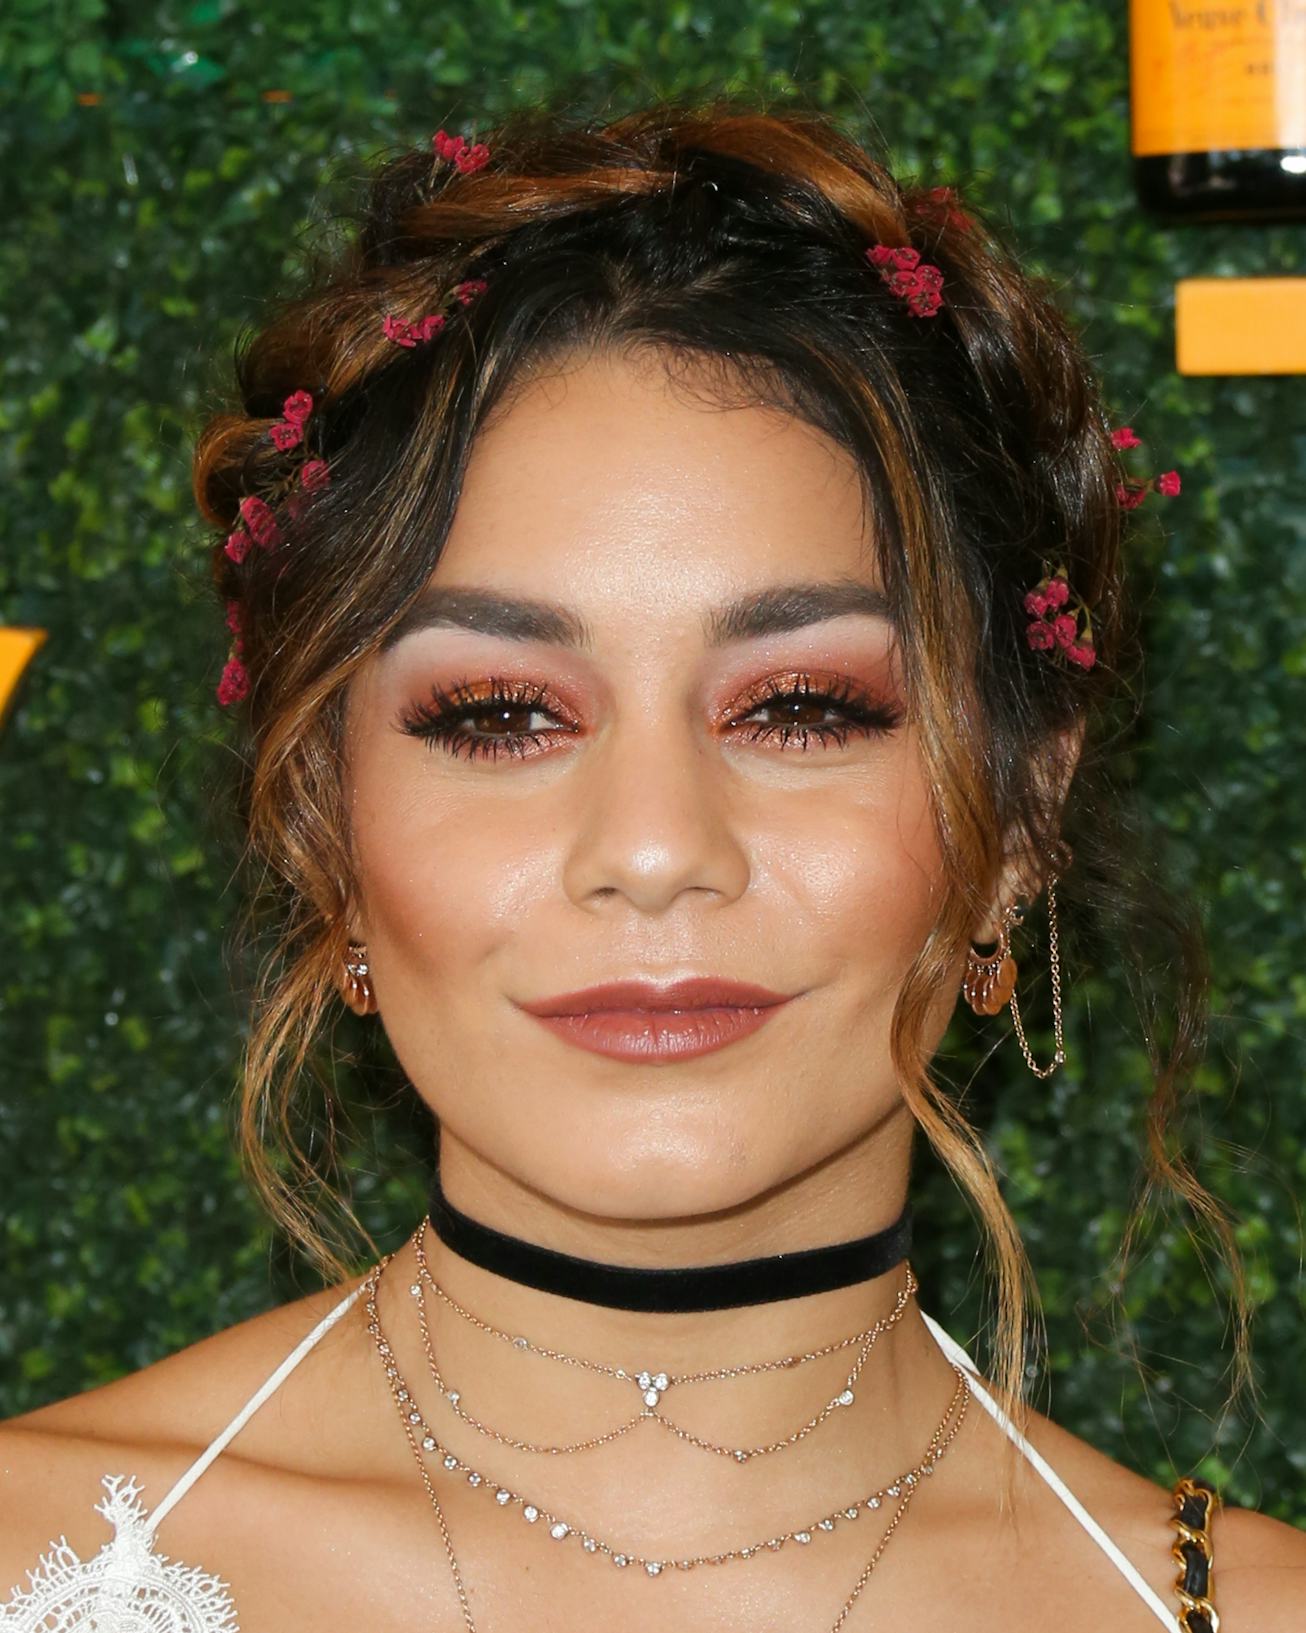 Actress Vanessa Hudgens wearing a black choker, necklace and flowers in her hair 